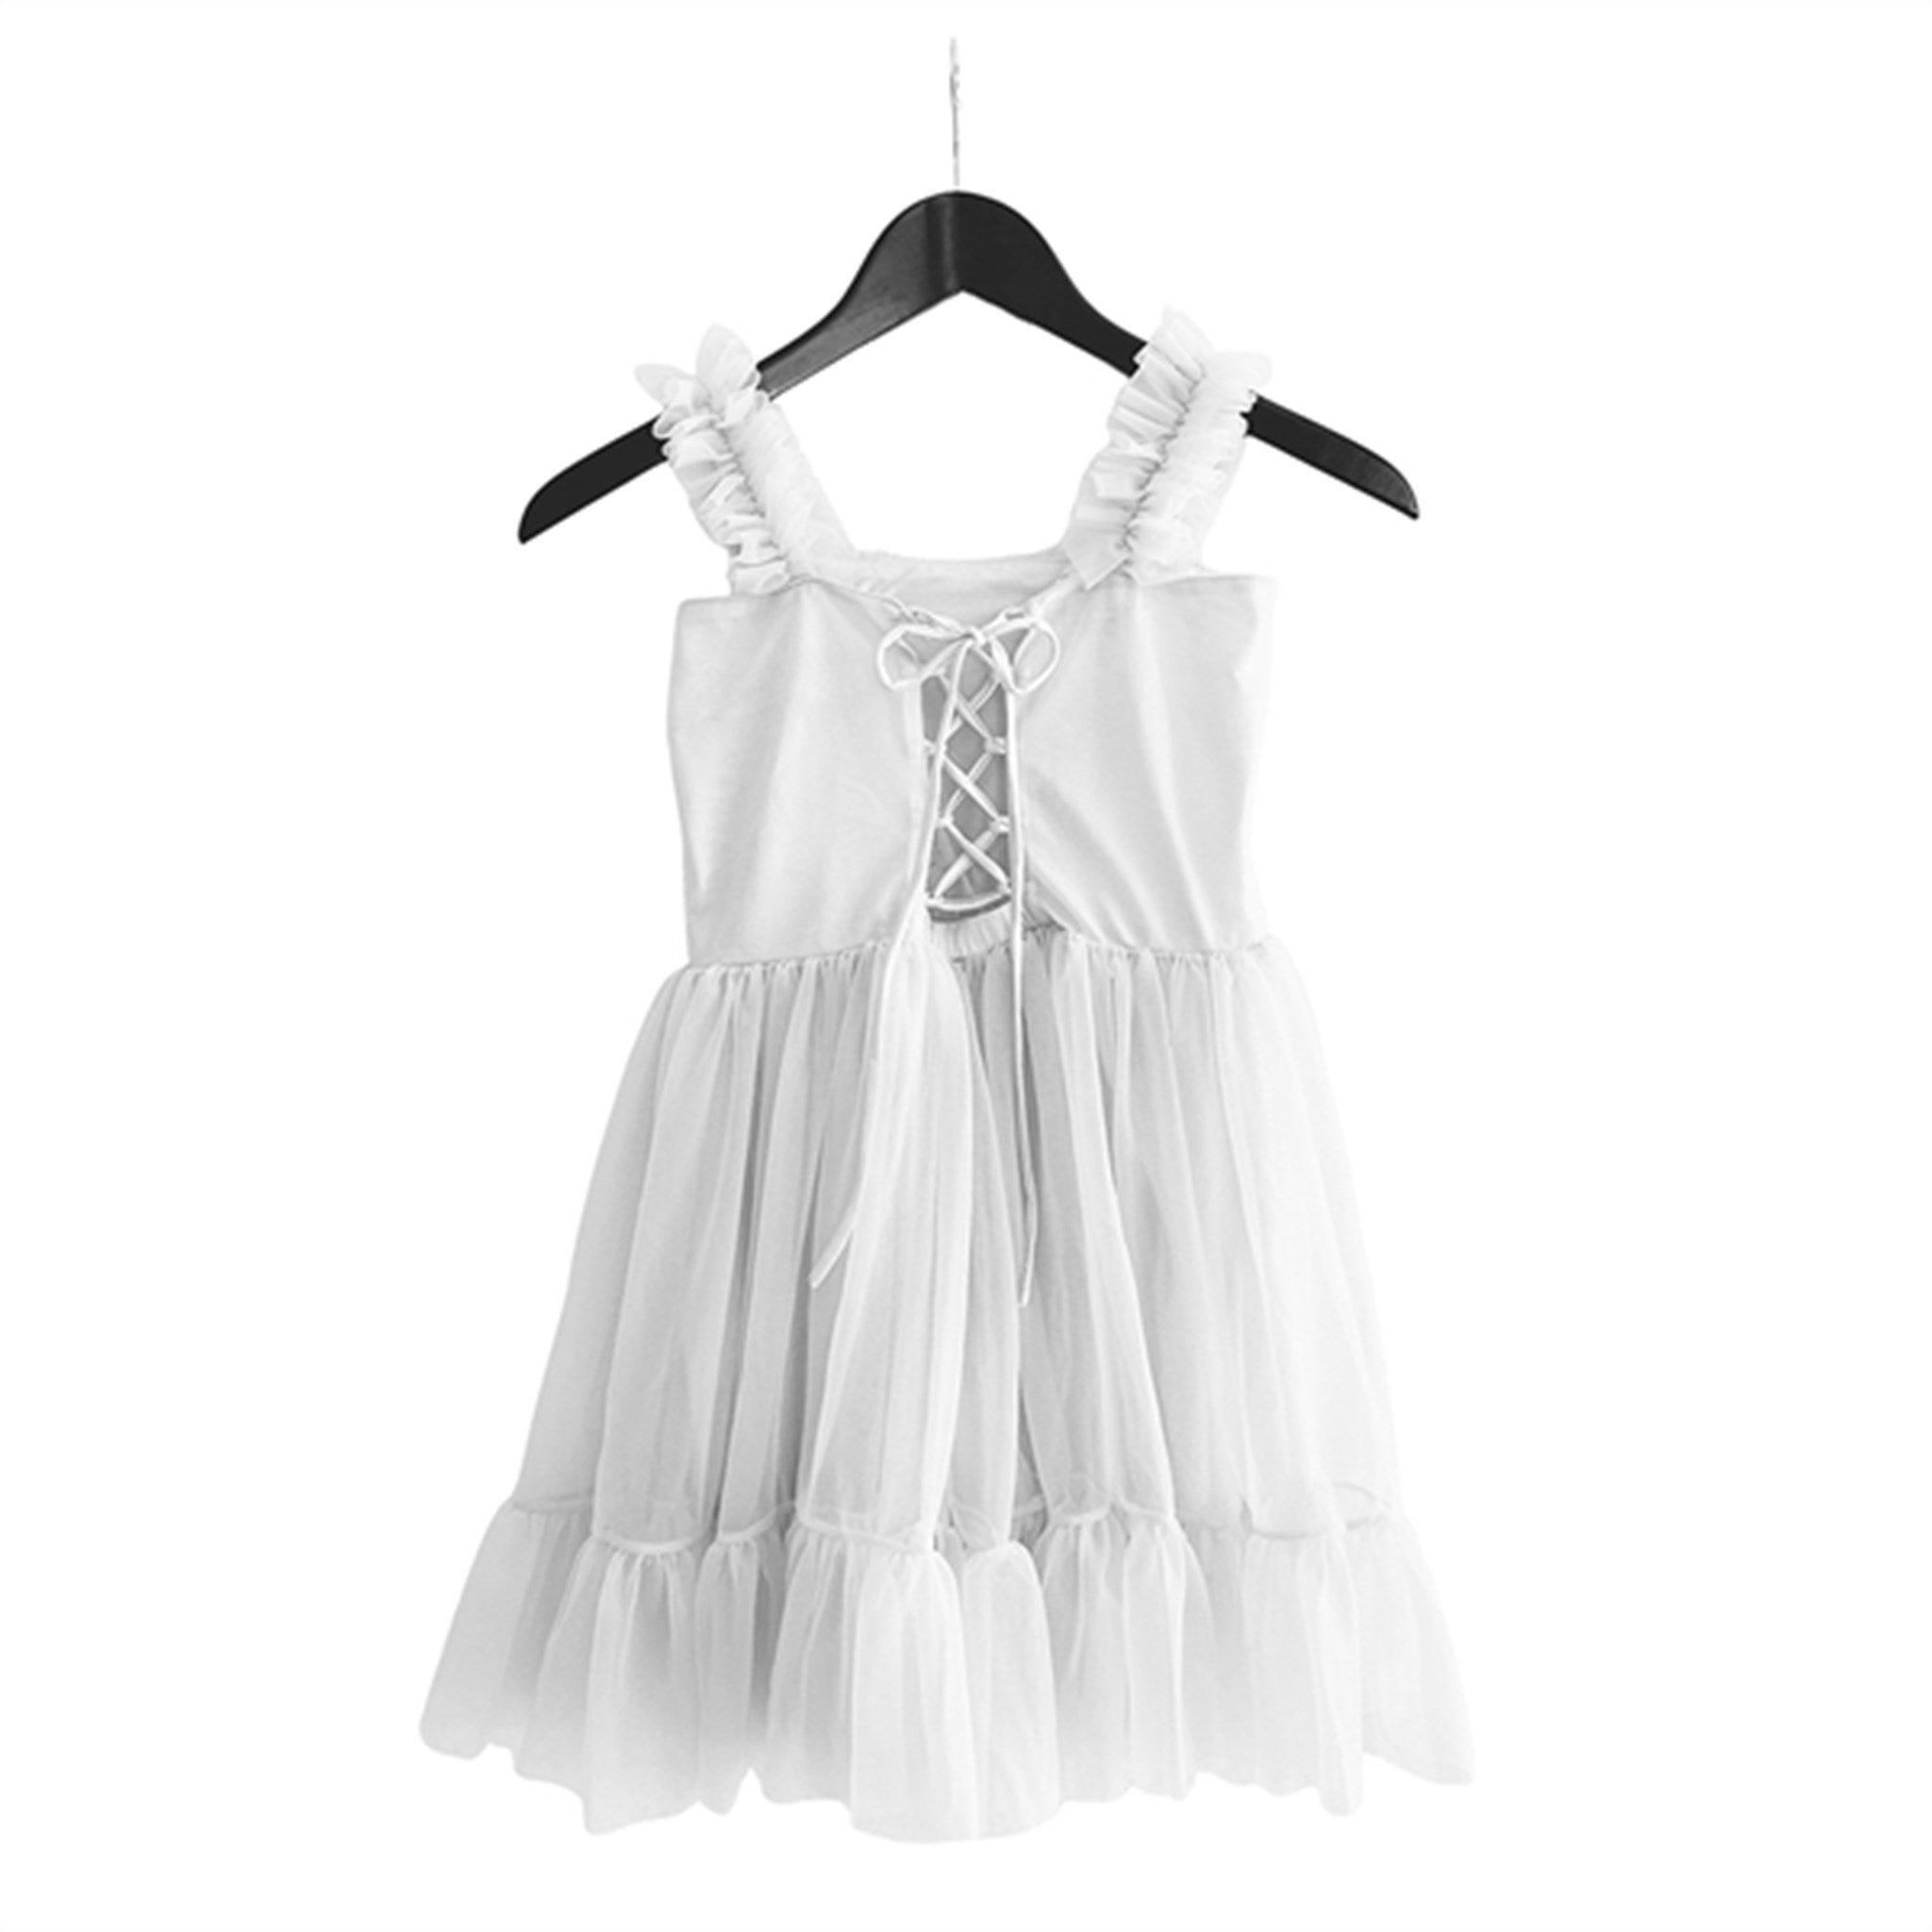 Dolly by Le Petit Heart Klänning Lace Up Off White 3